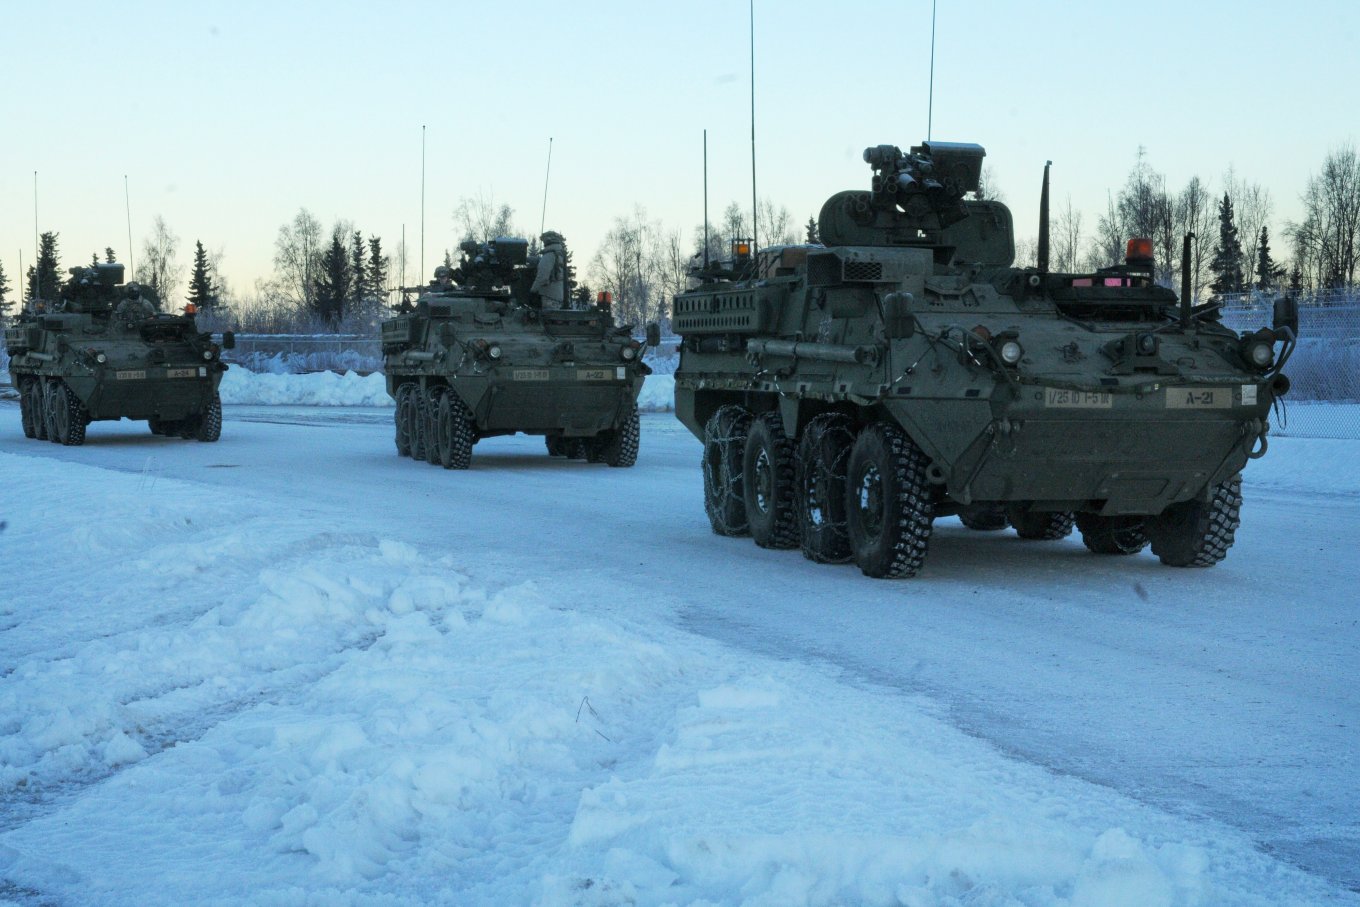 Stryker armored combat vehicles